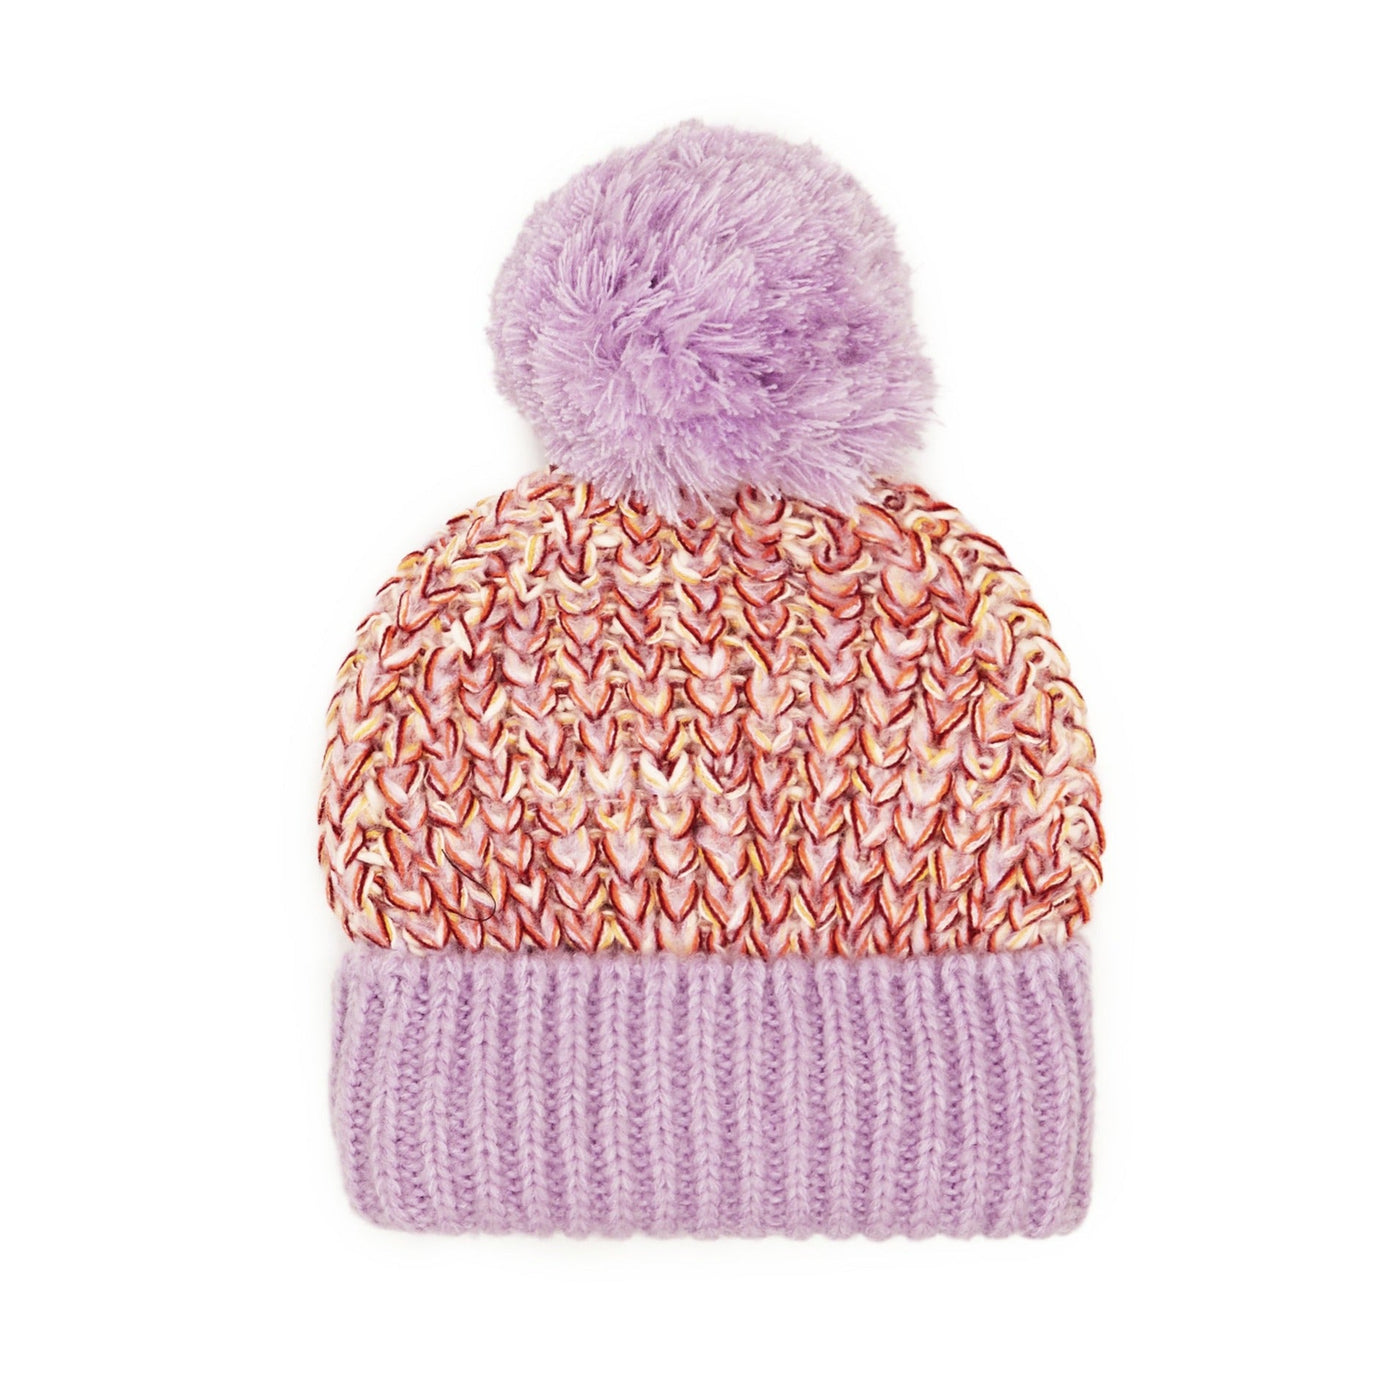 Lolly Beanie Bobble Hat - Lilac